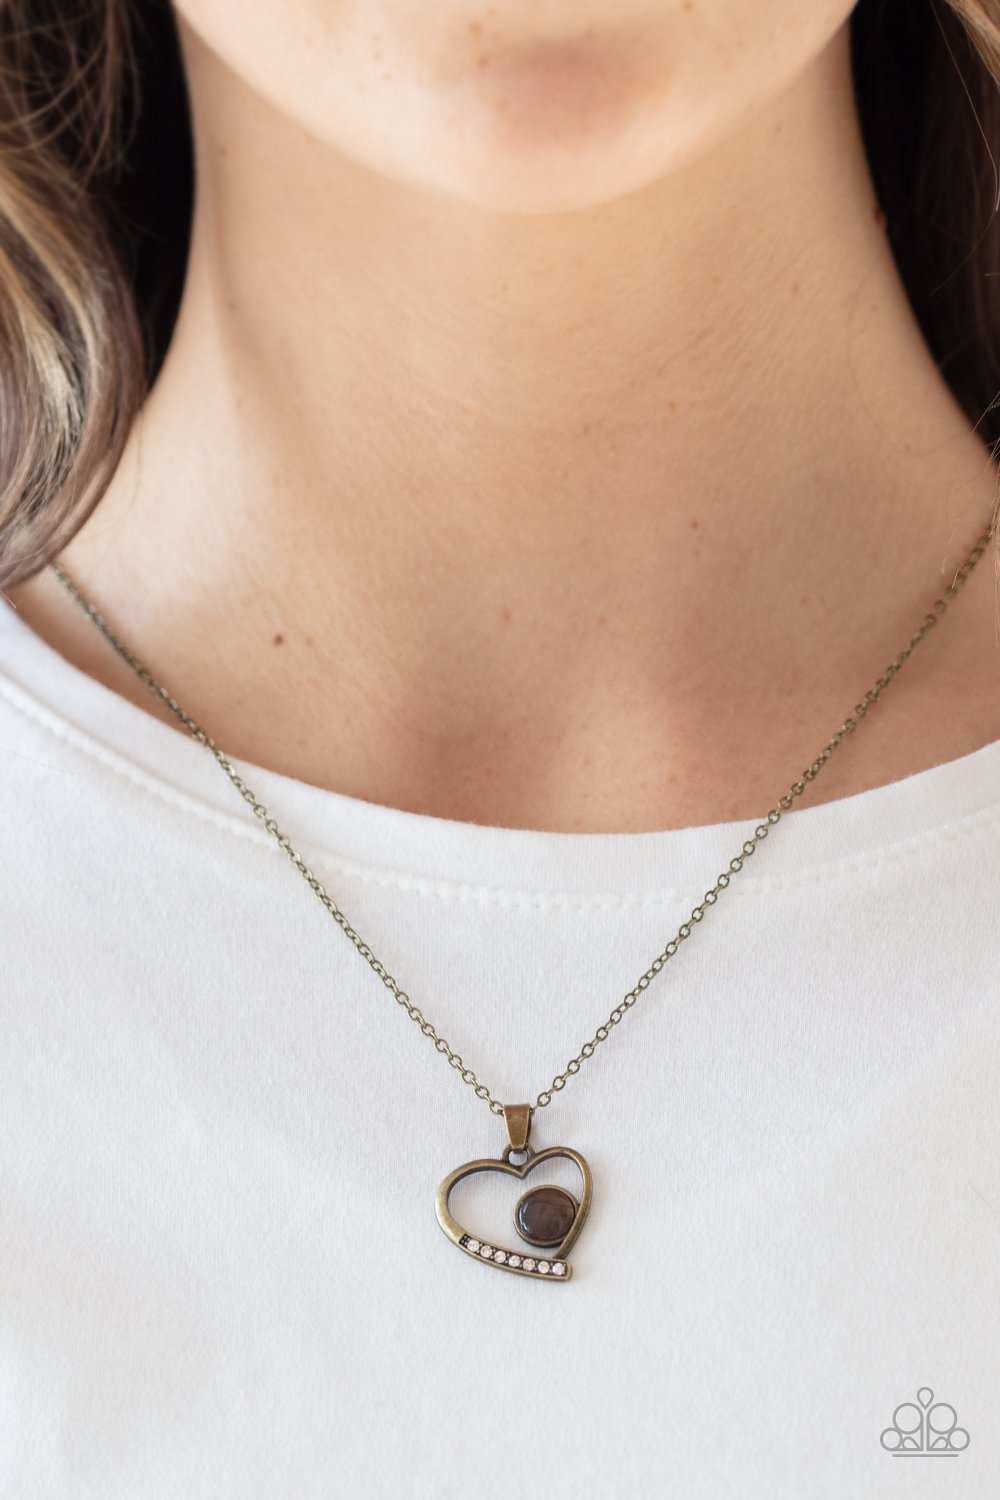 Heart Full of Love-brass-Paparazzi necklace